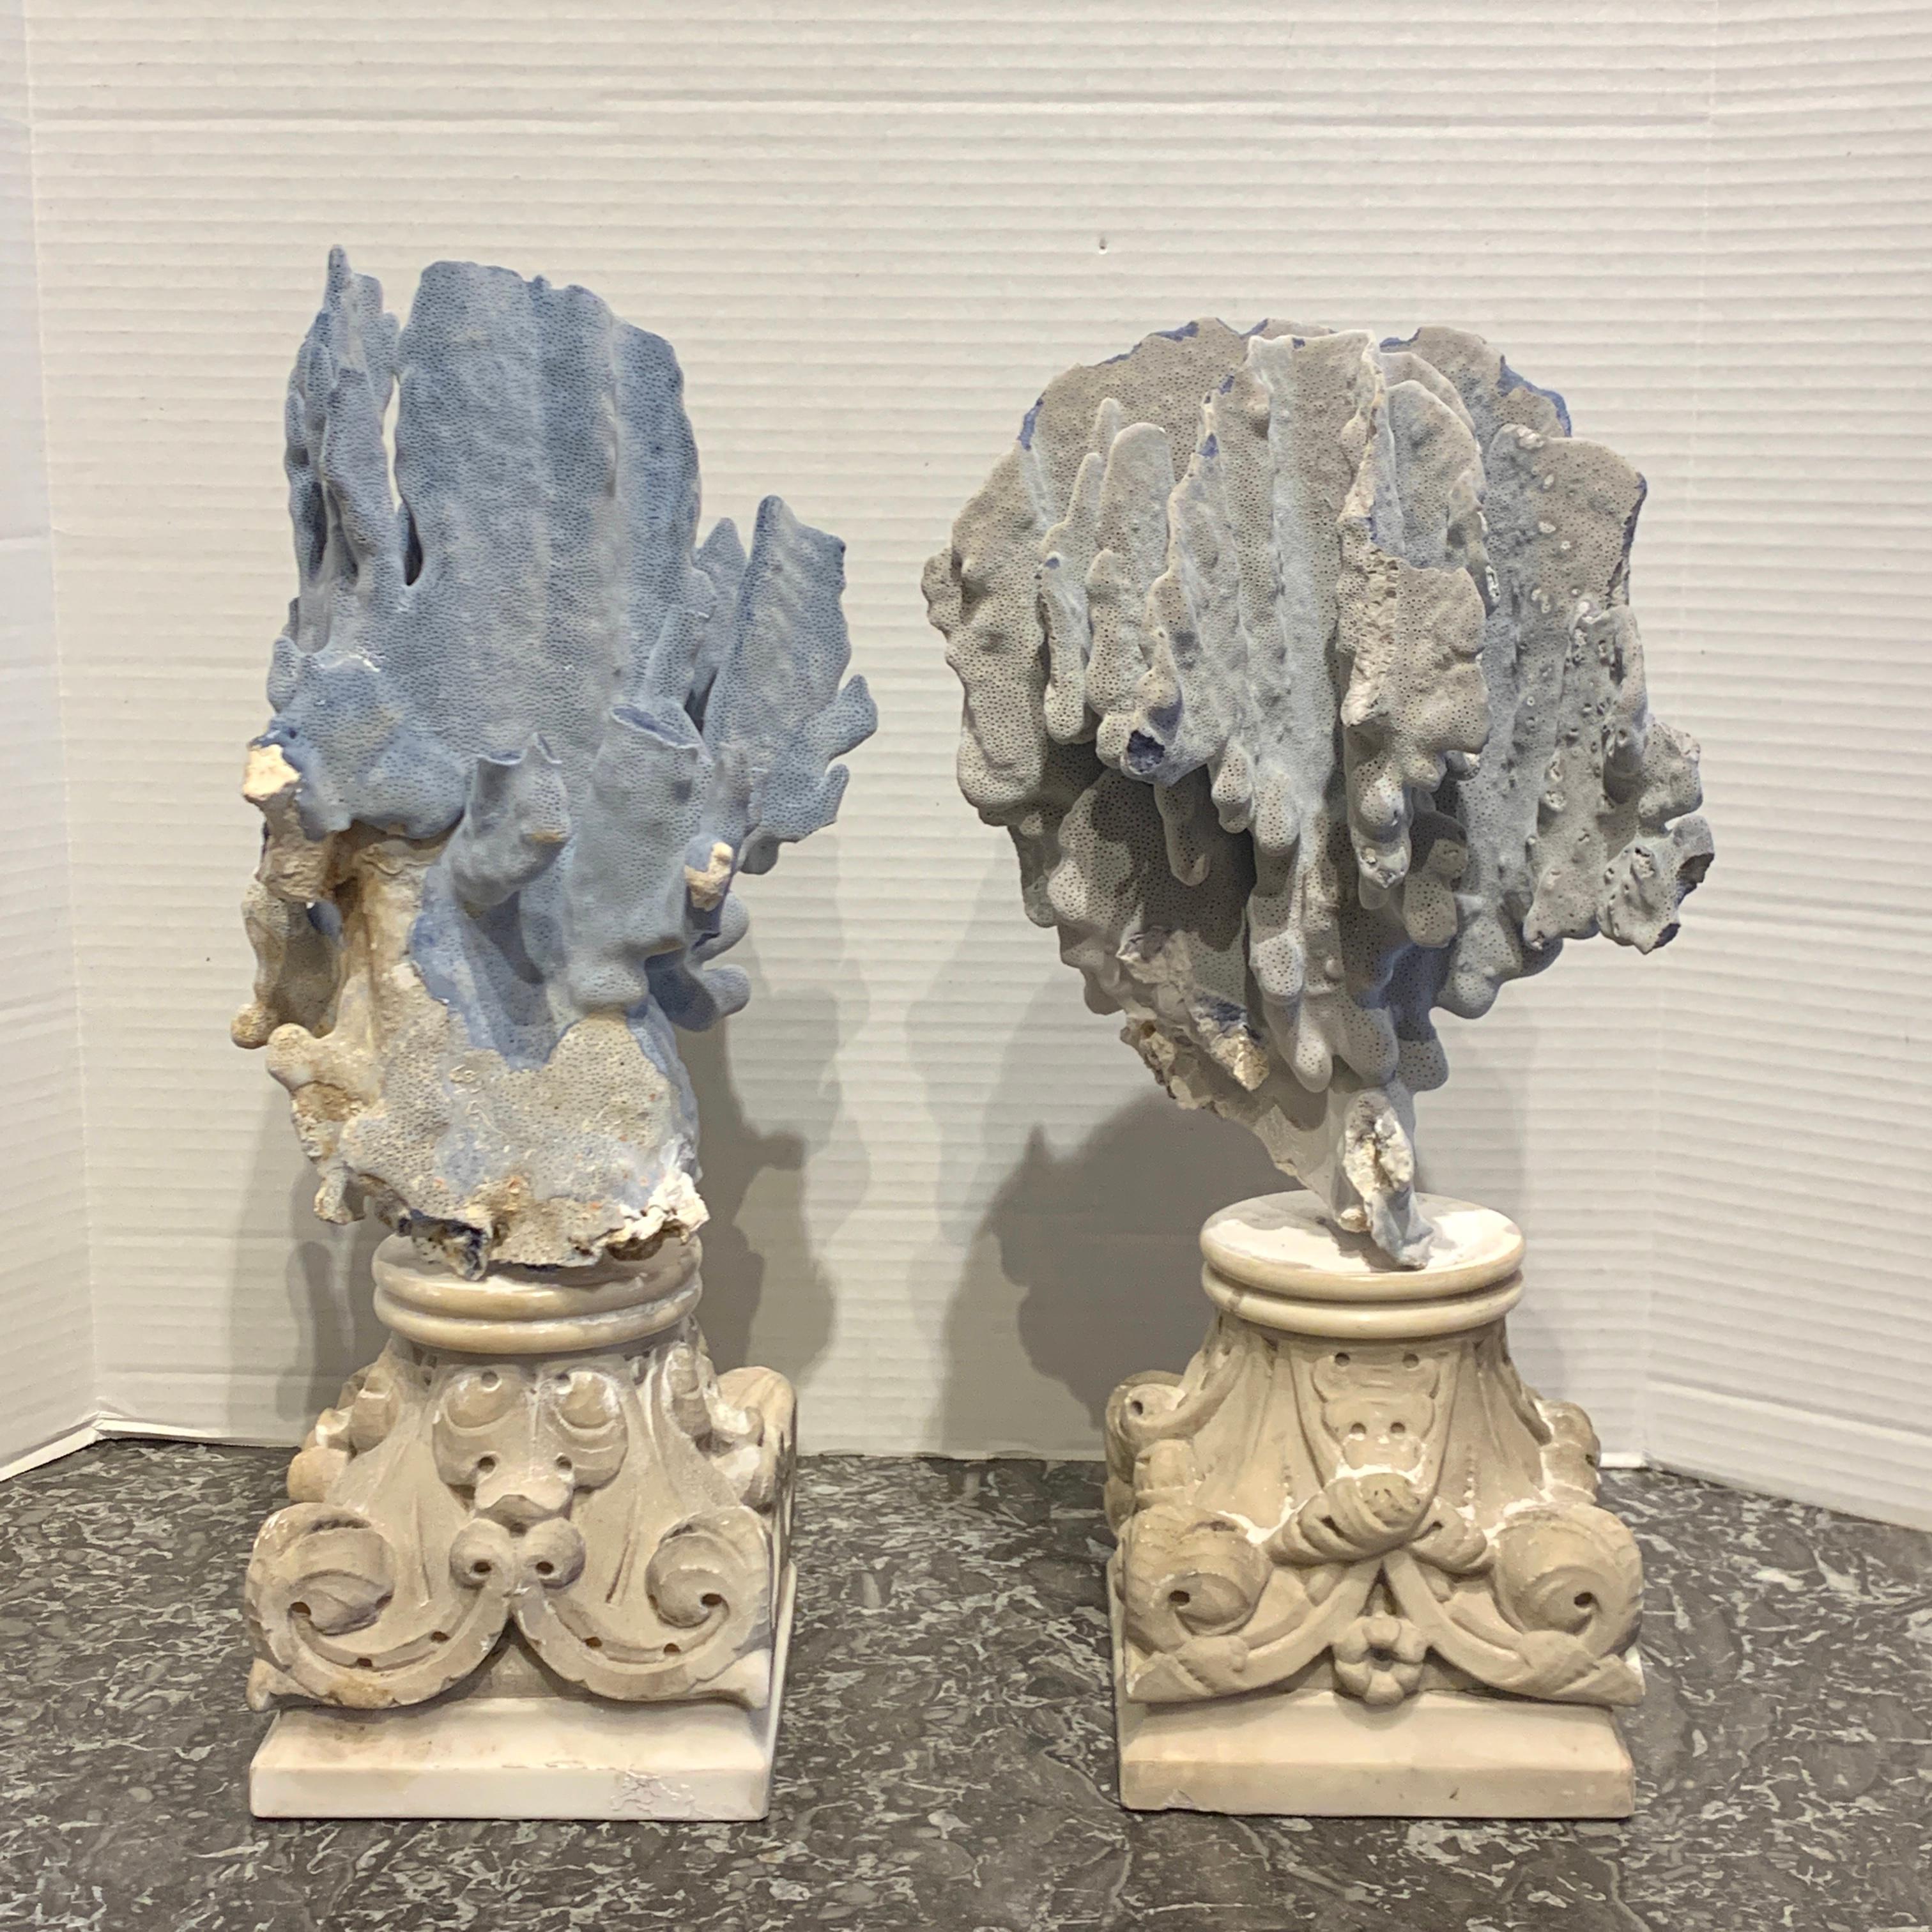 Pair of 19th century Grand Tour specimen blue coral on Carrara marble pedestals, each one removable from the finely carved 7-inch square Greek / Roman style Carrara marble bases.
Each specimen coral and marble base weighs approximately 30